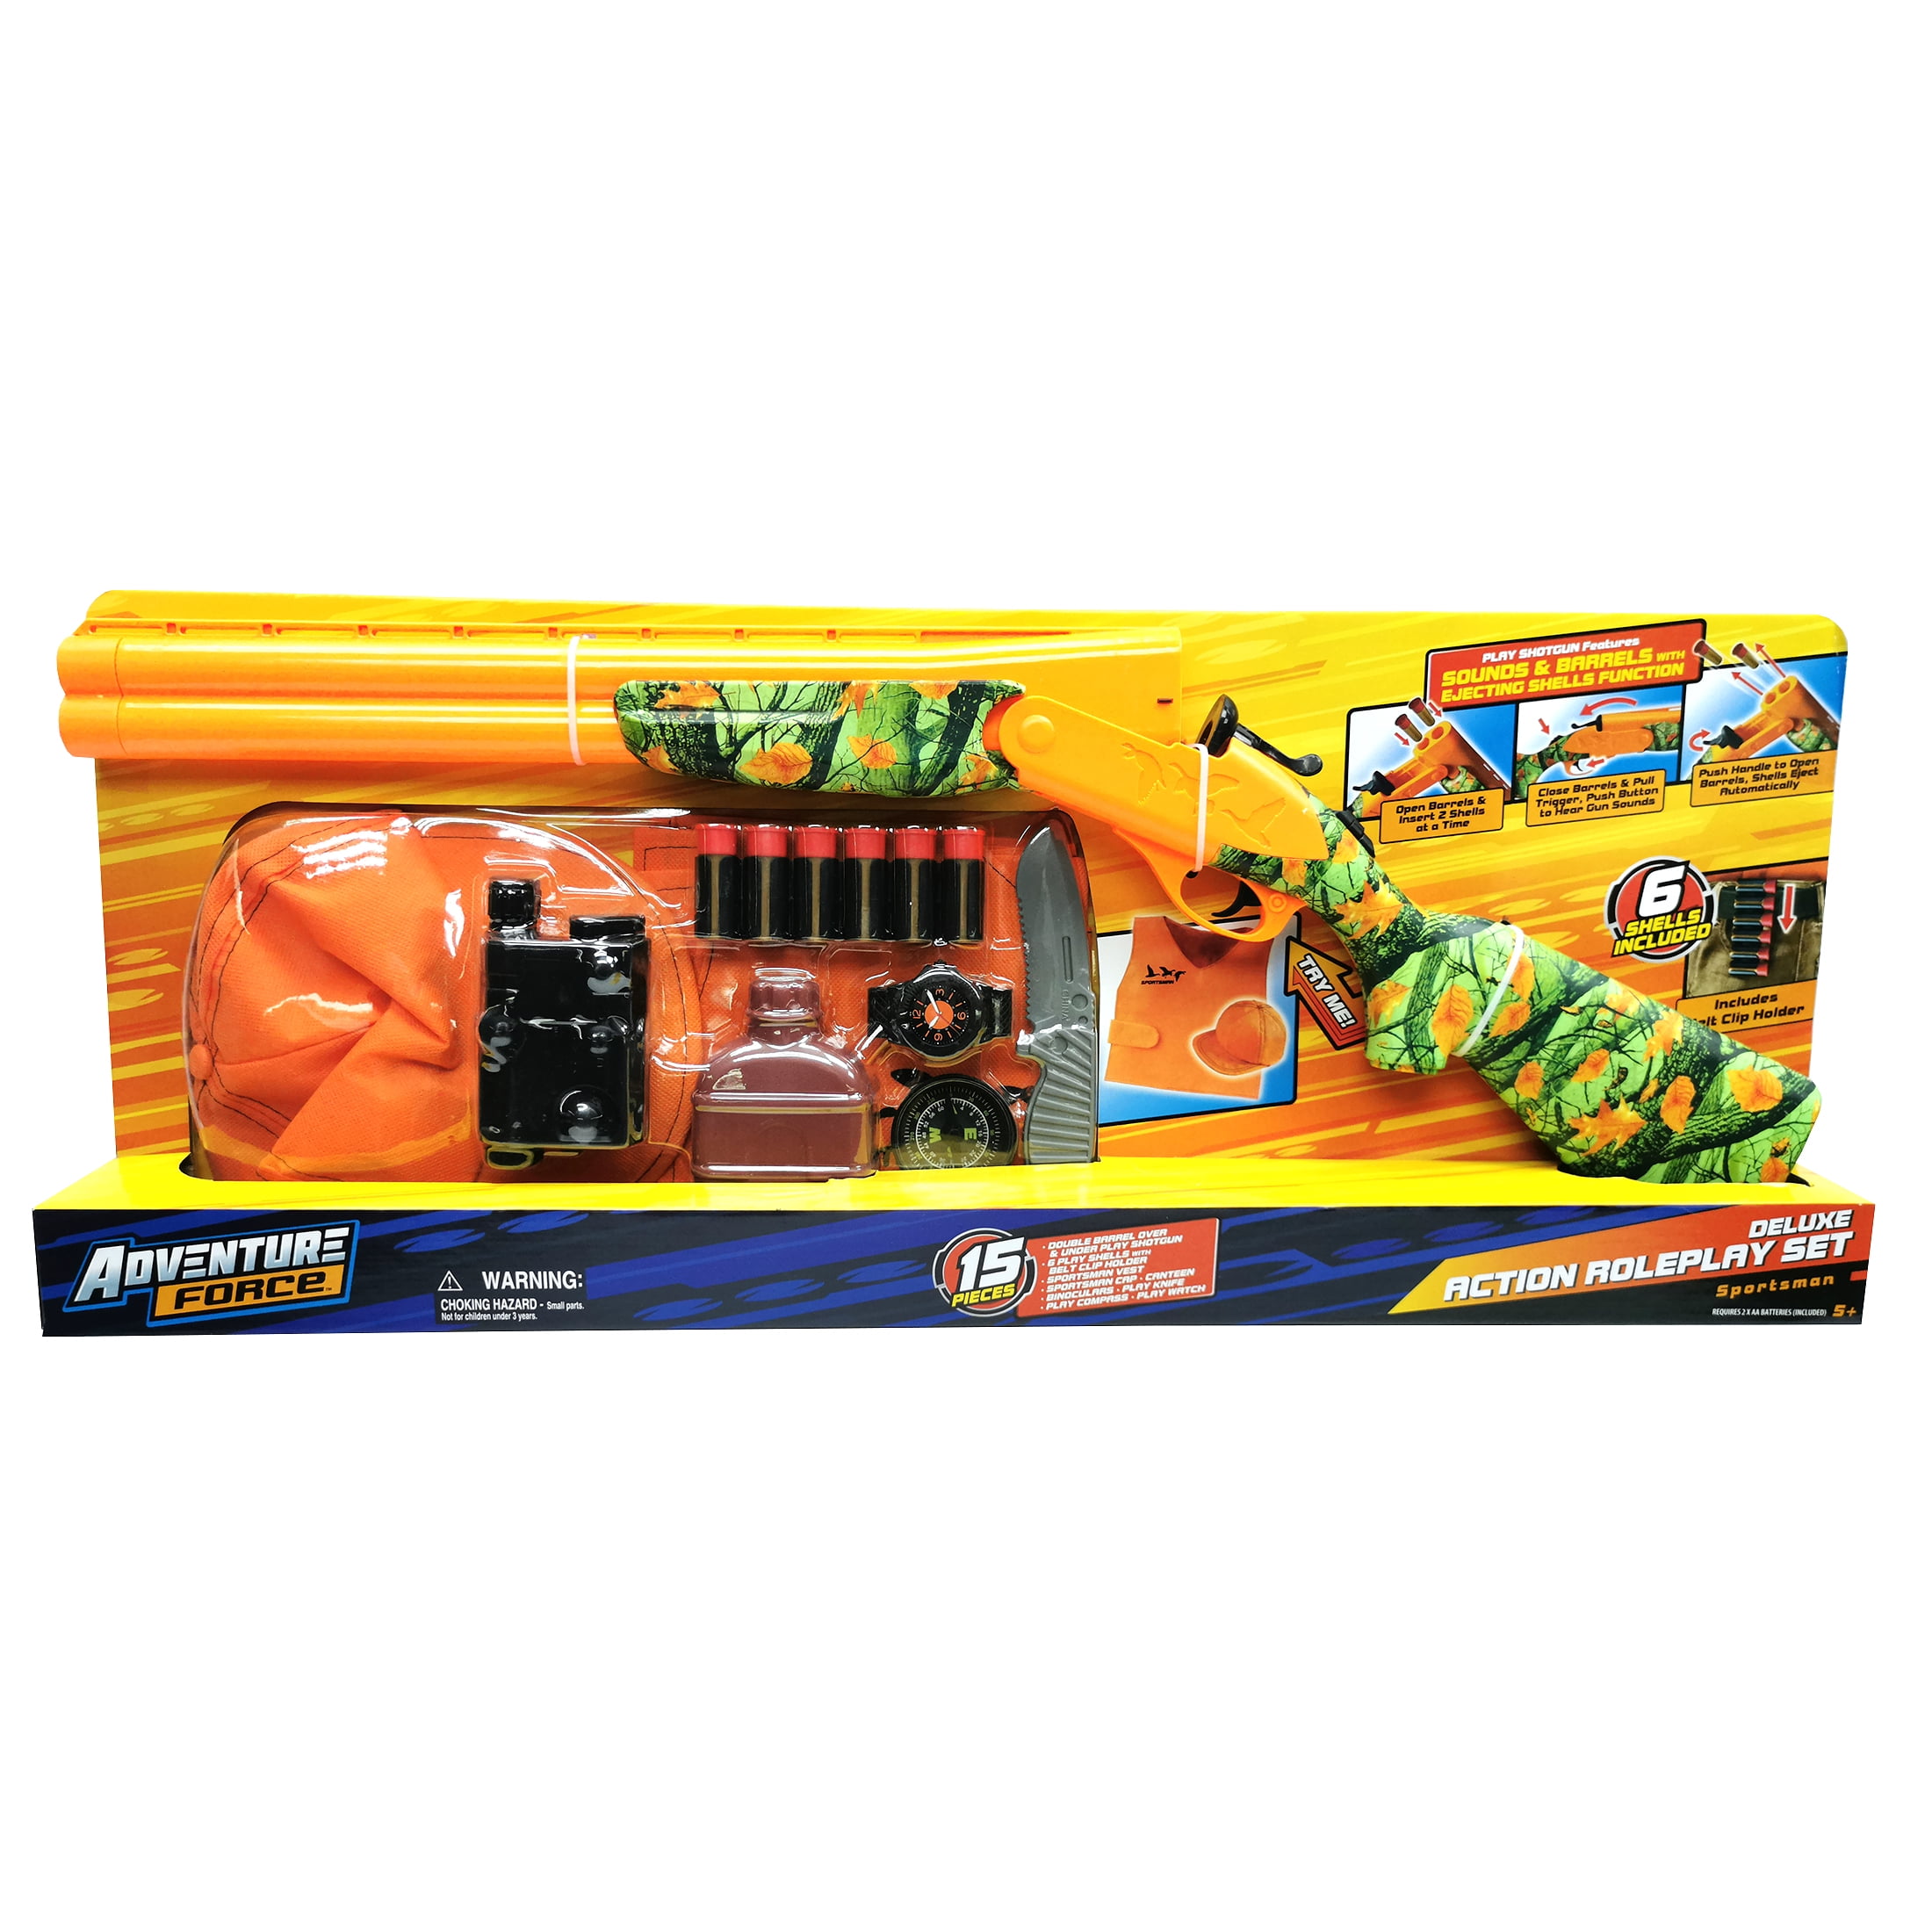 Adventure Force Sportsman Deluxe Action Roleplay Set, 15 pc